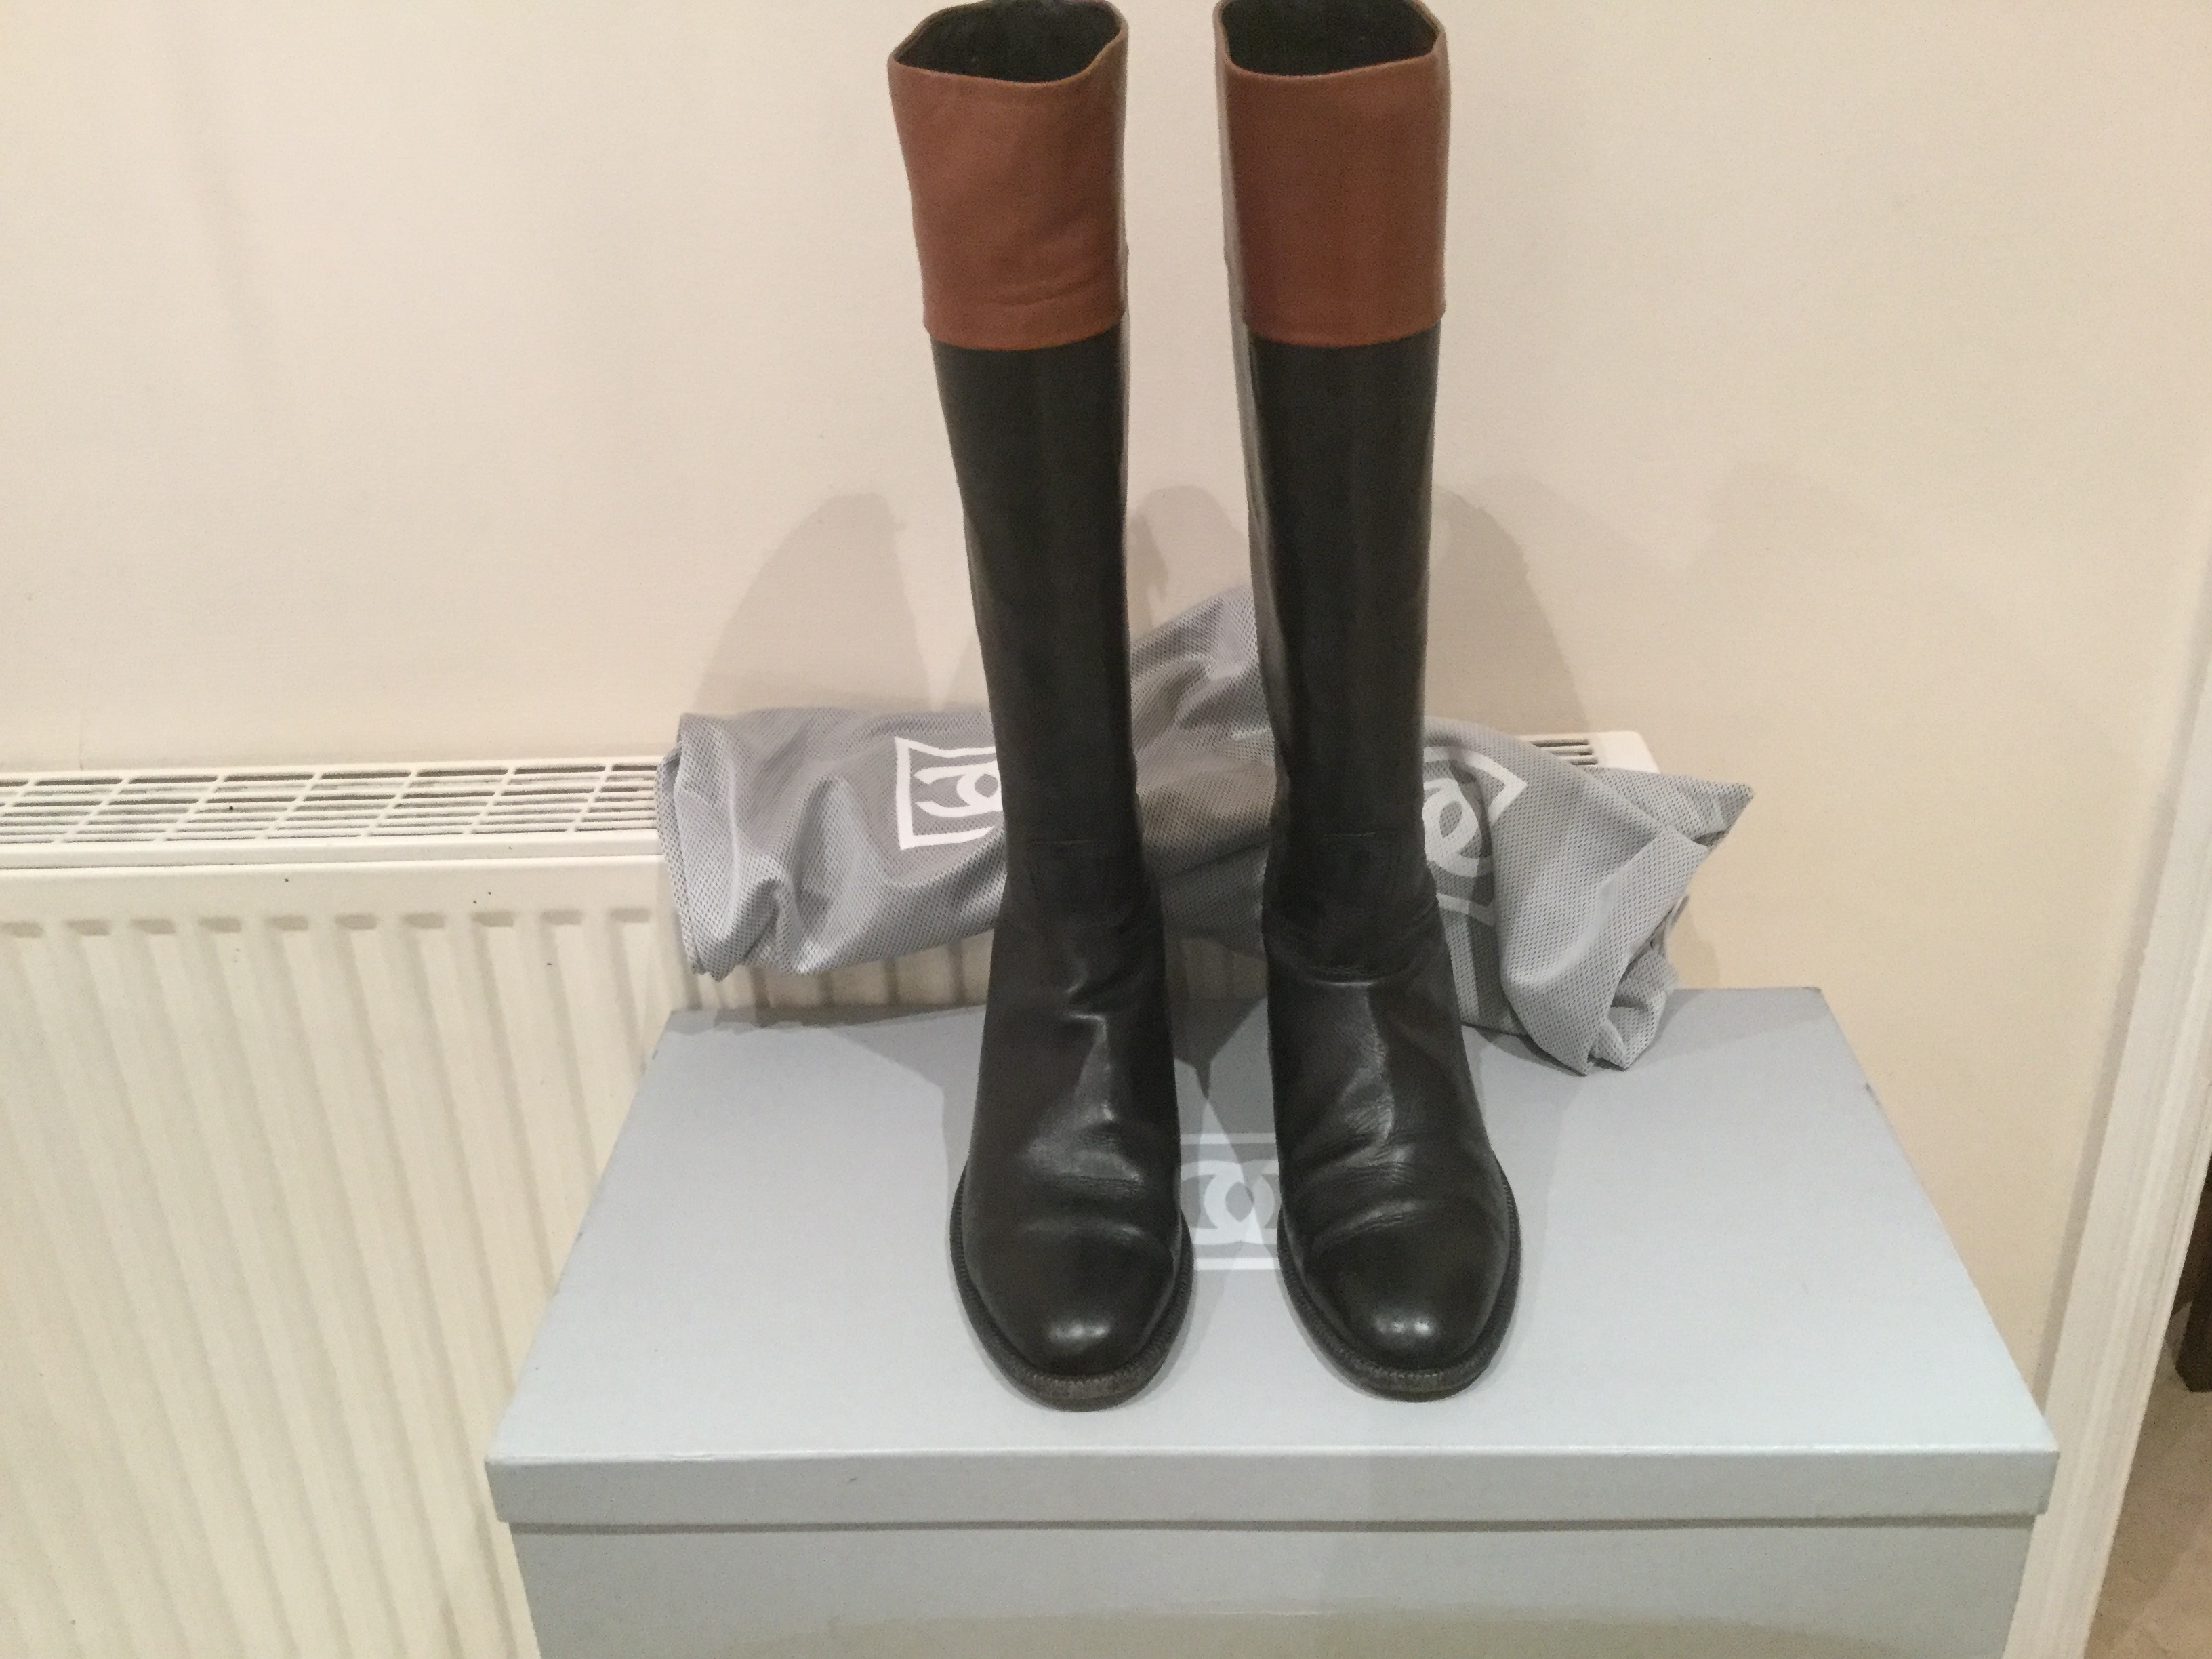 chanel riding boots